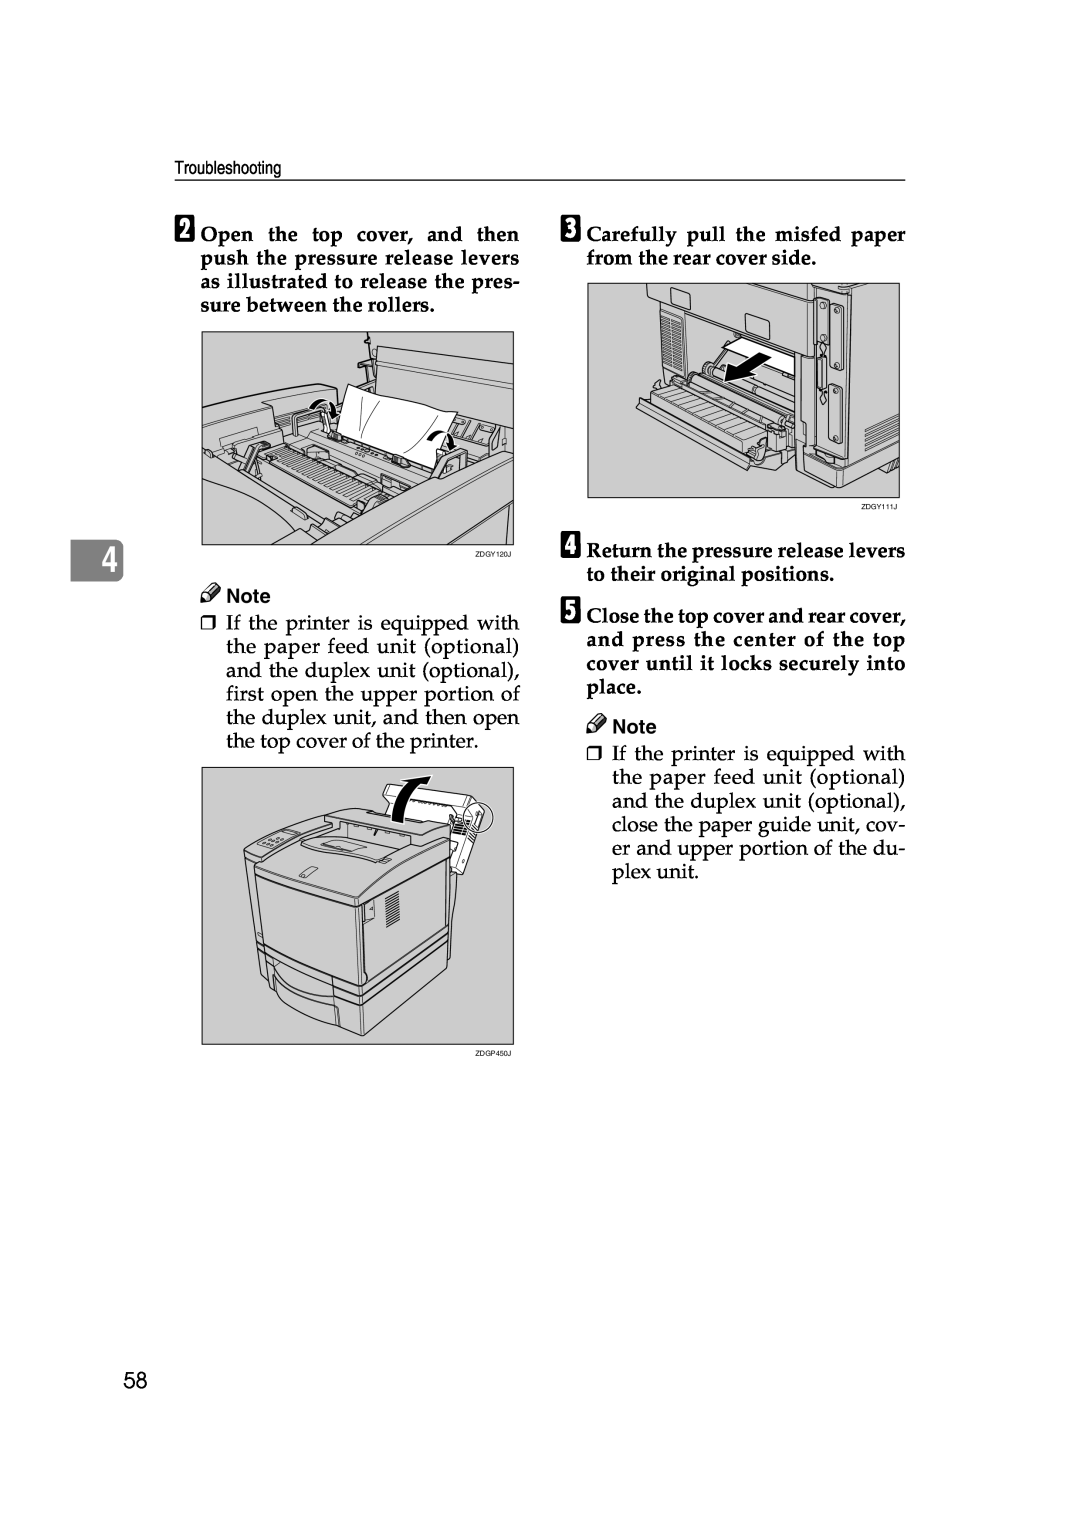 Lanier AP206 manual C Carefully pull the misfed paper from the rear cover side 